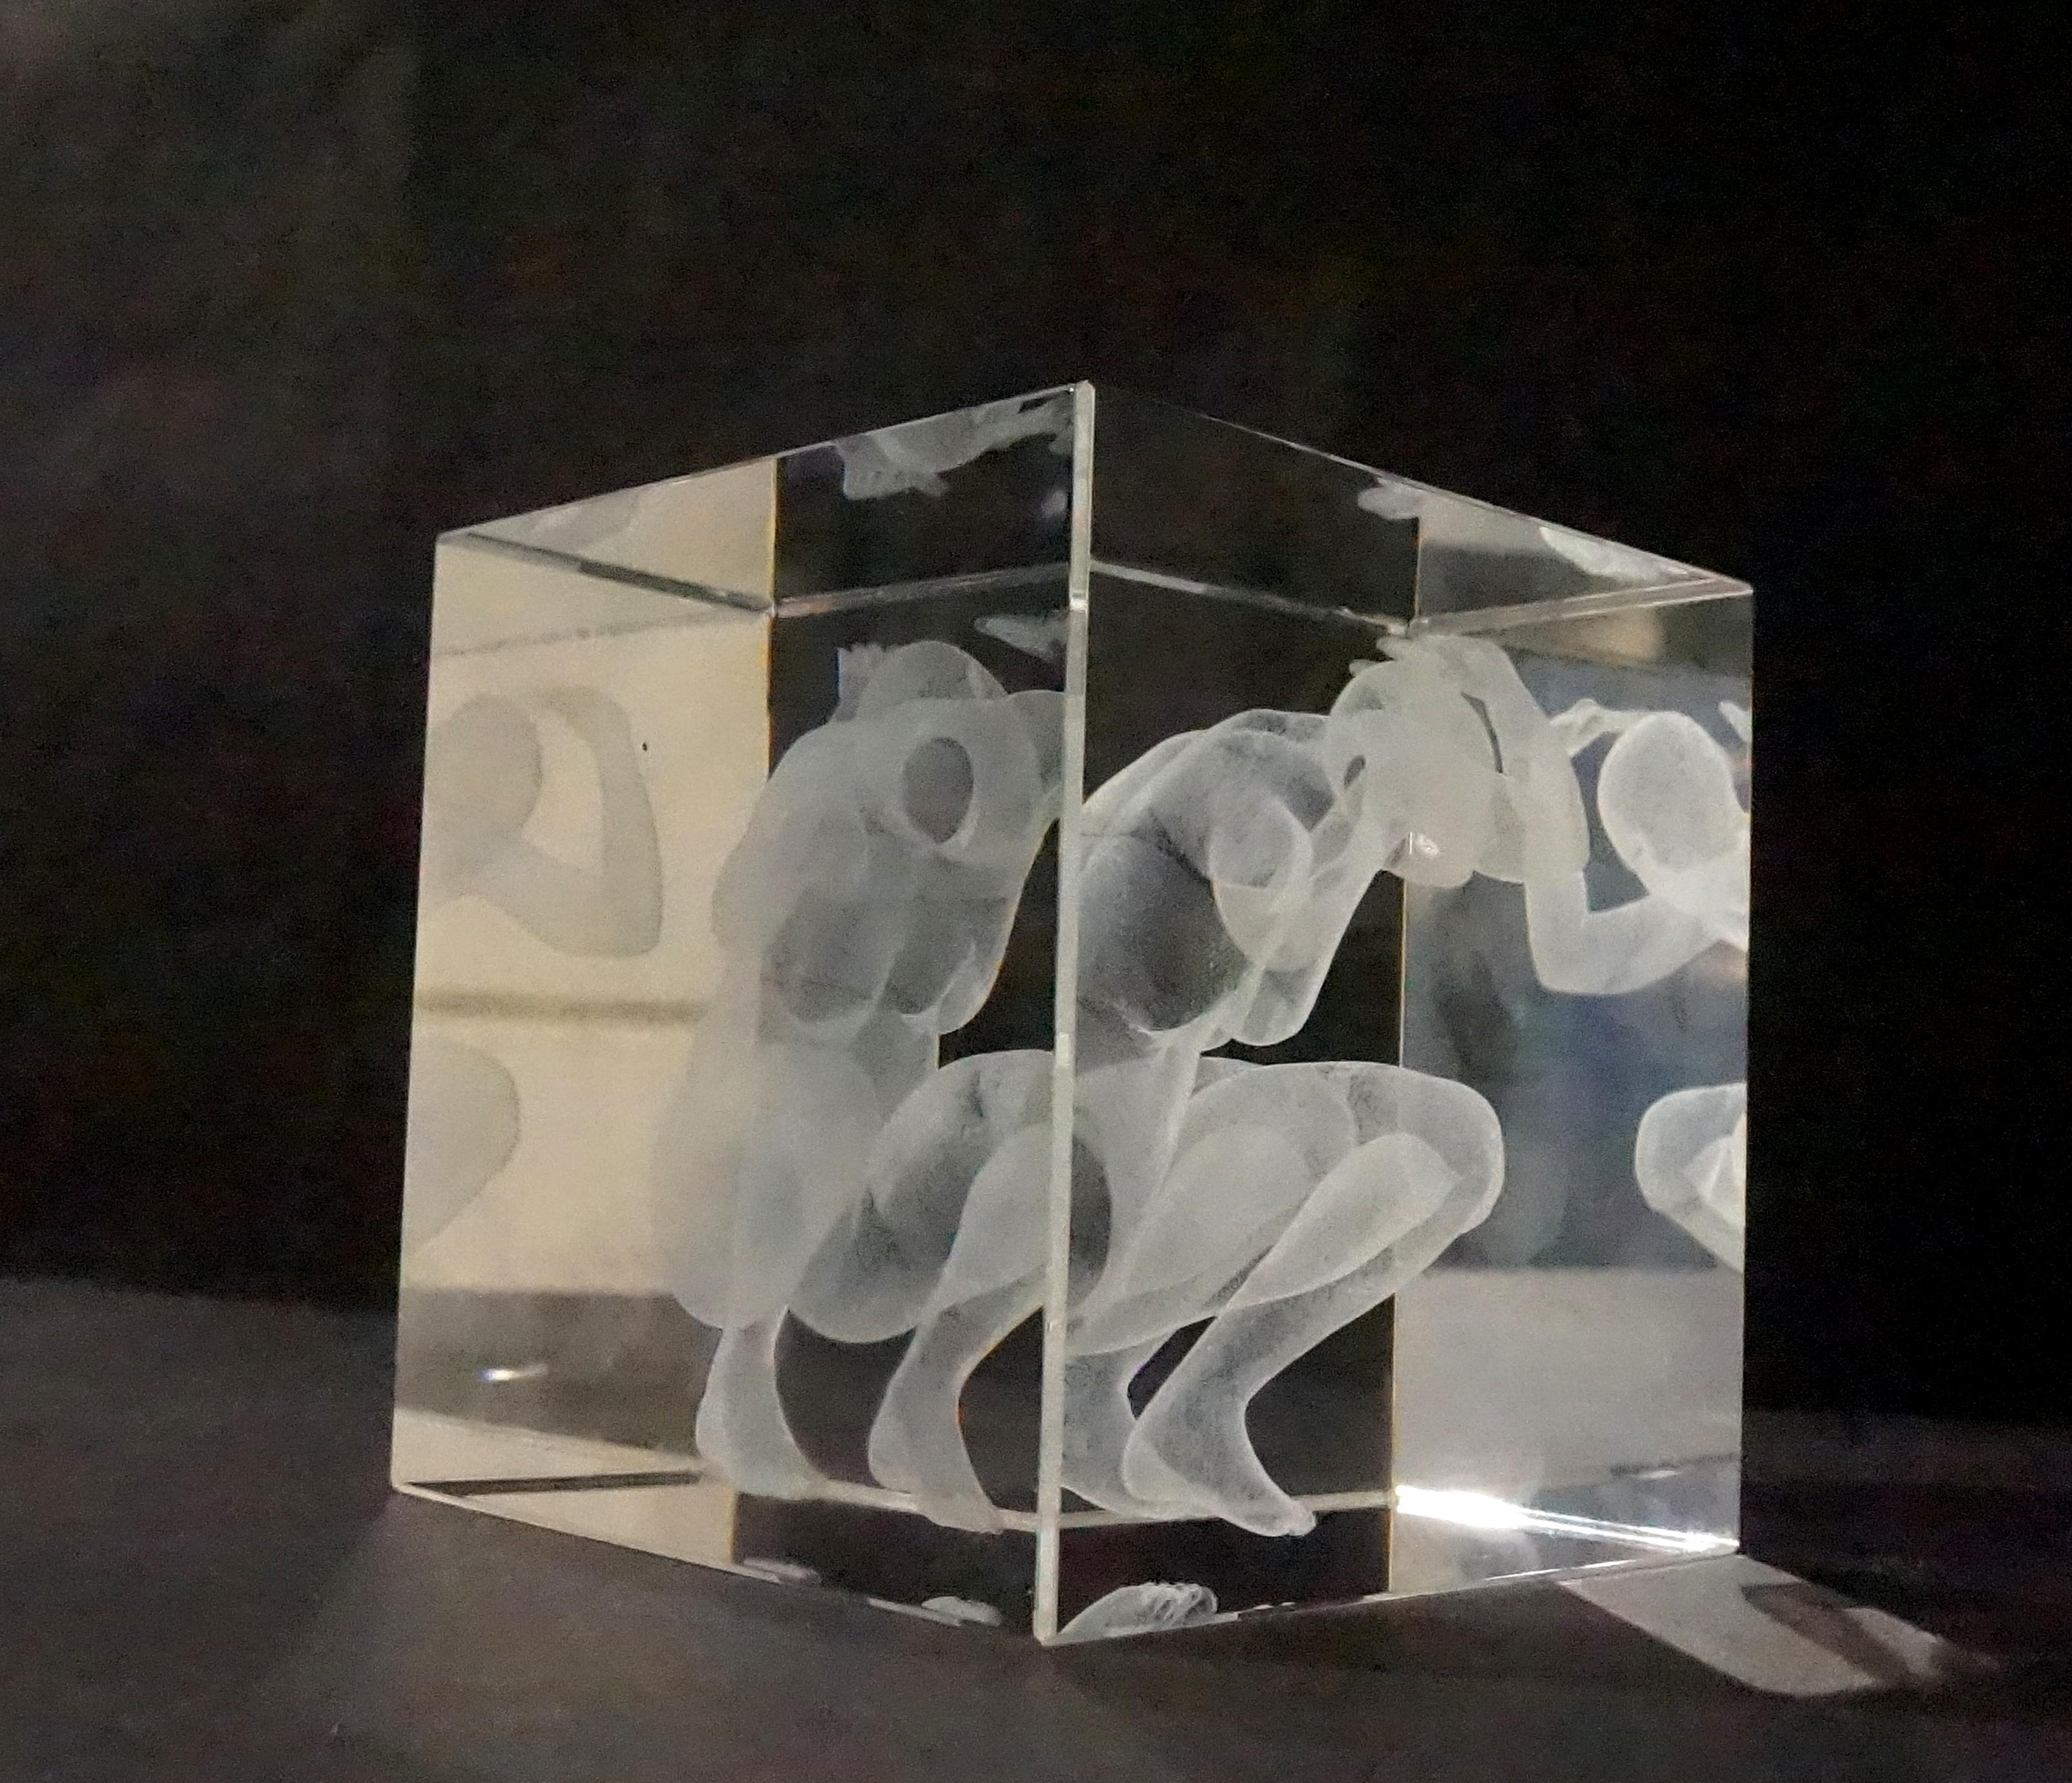 Trapped Woman
Crystal Glass, Solid Marble, Laser Engraving
8x8 cm
About Artist
As an artist who lives in İstanbul and collaborates with the fields of historiography, politics and sociology, the works I have produced in the last twenty years are